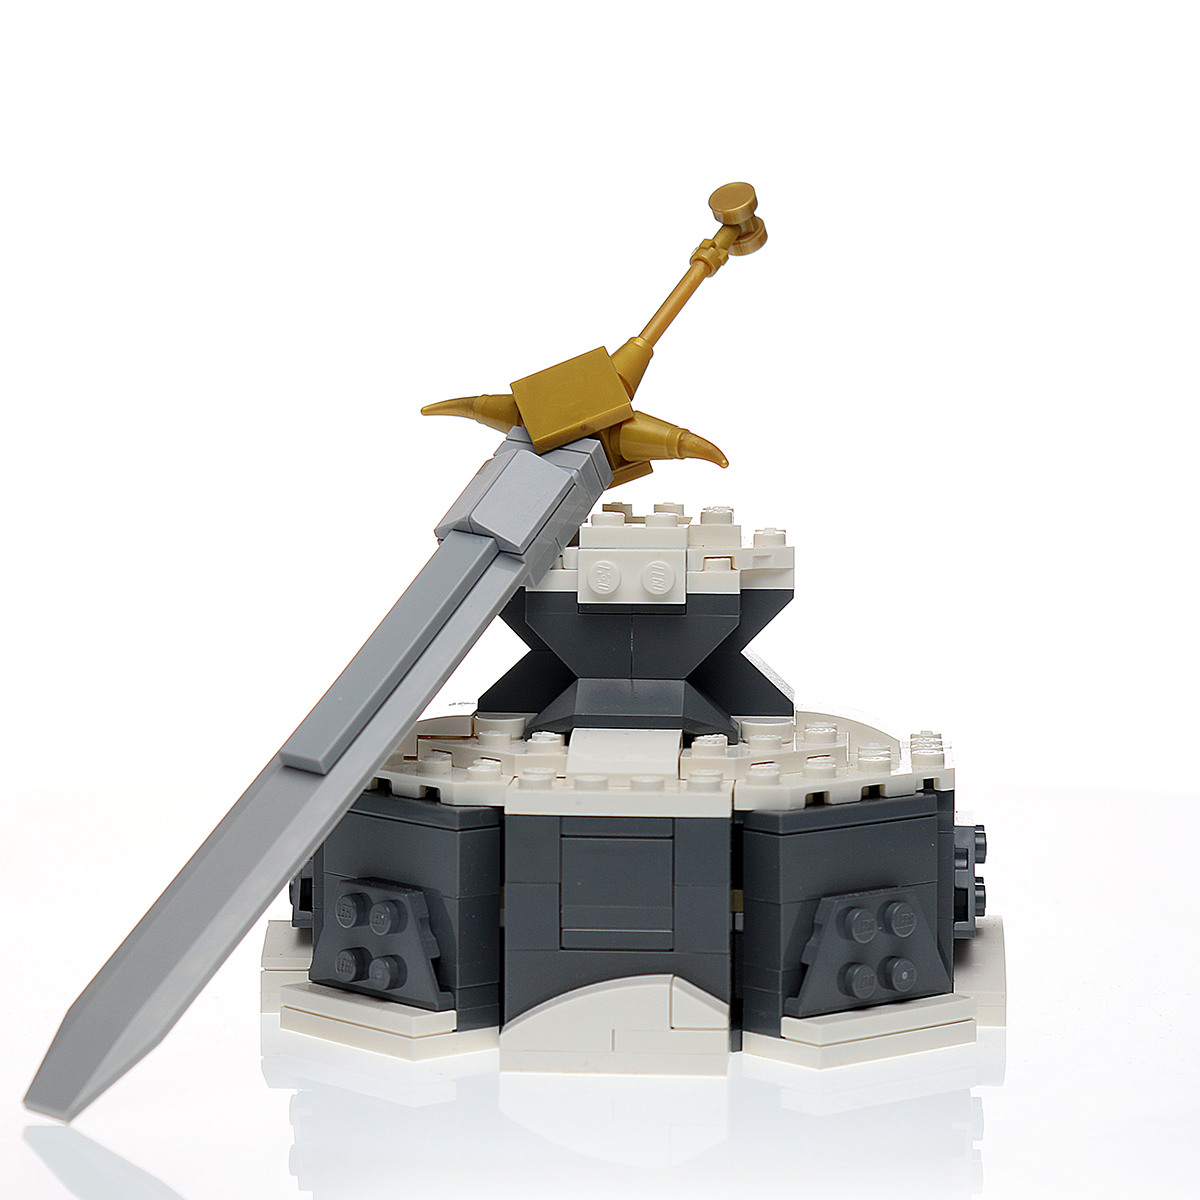 Custom Sword in the Stone MOC made using LEGO elements